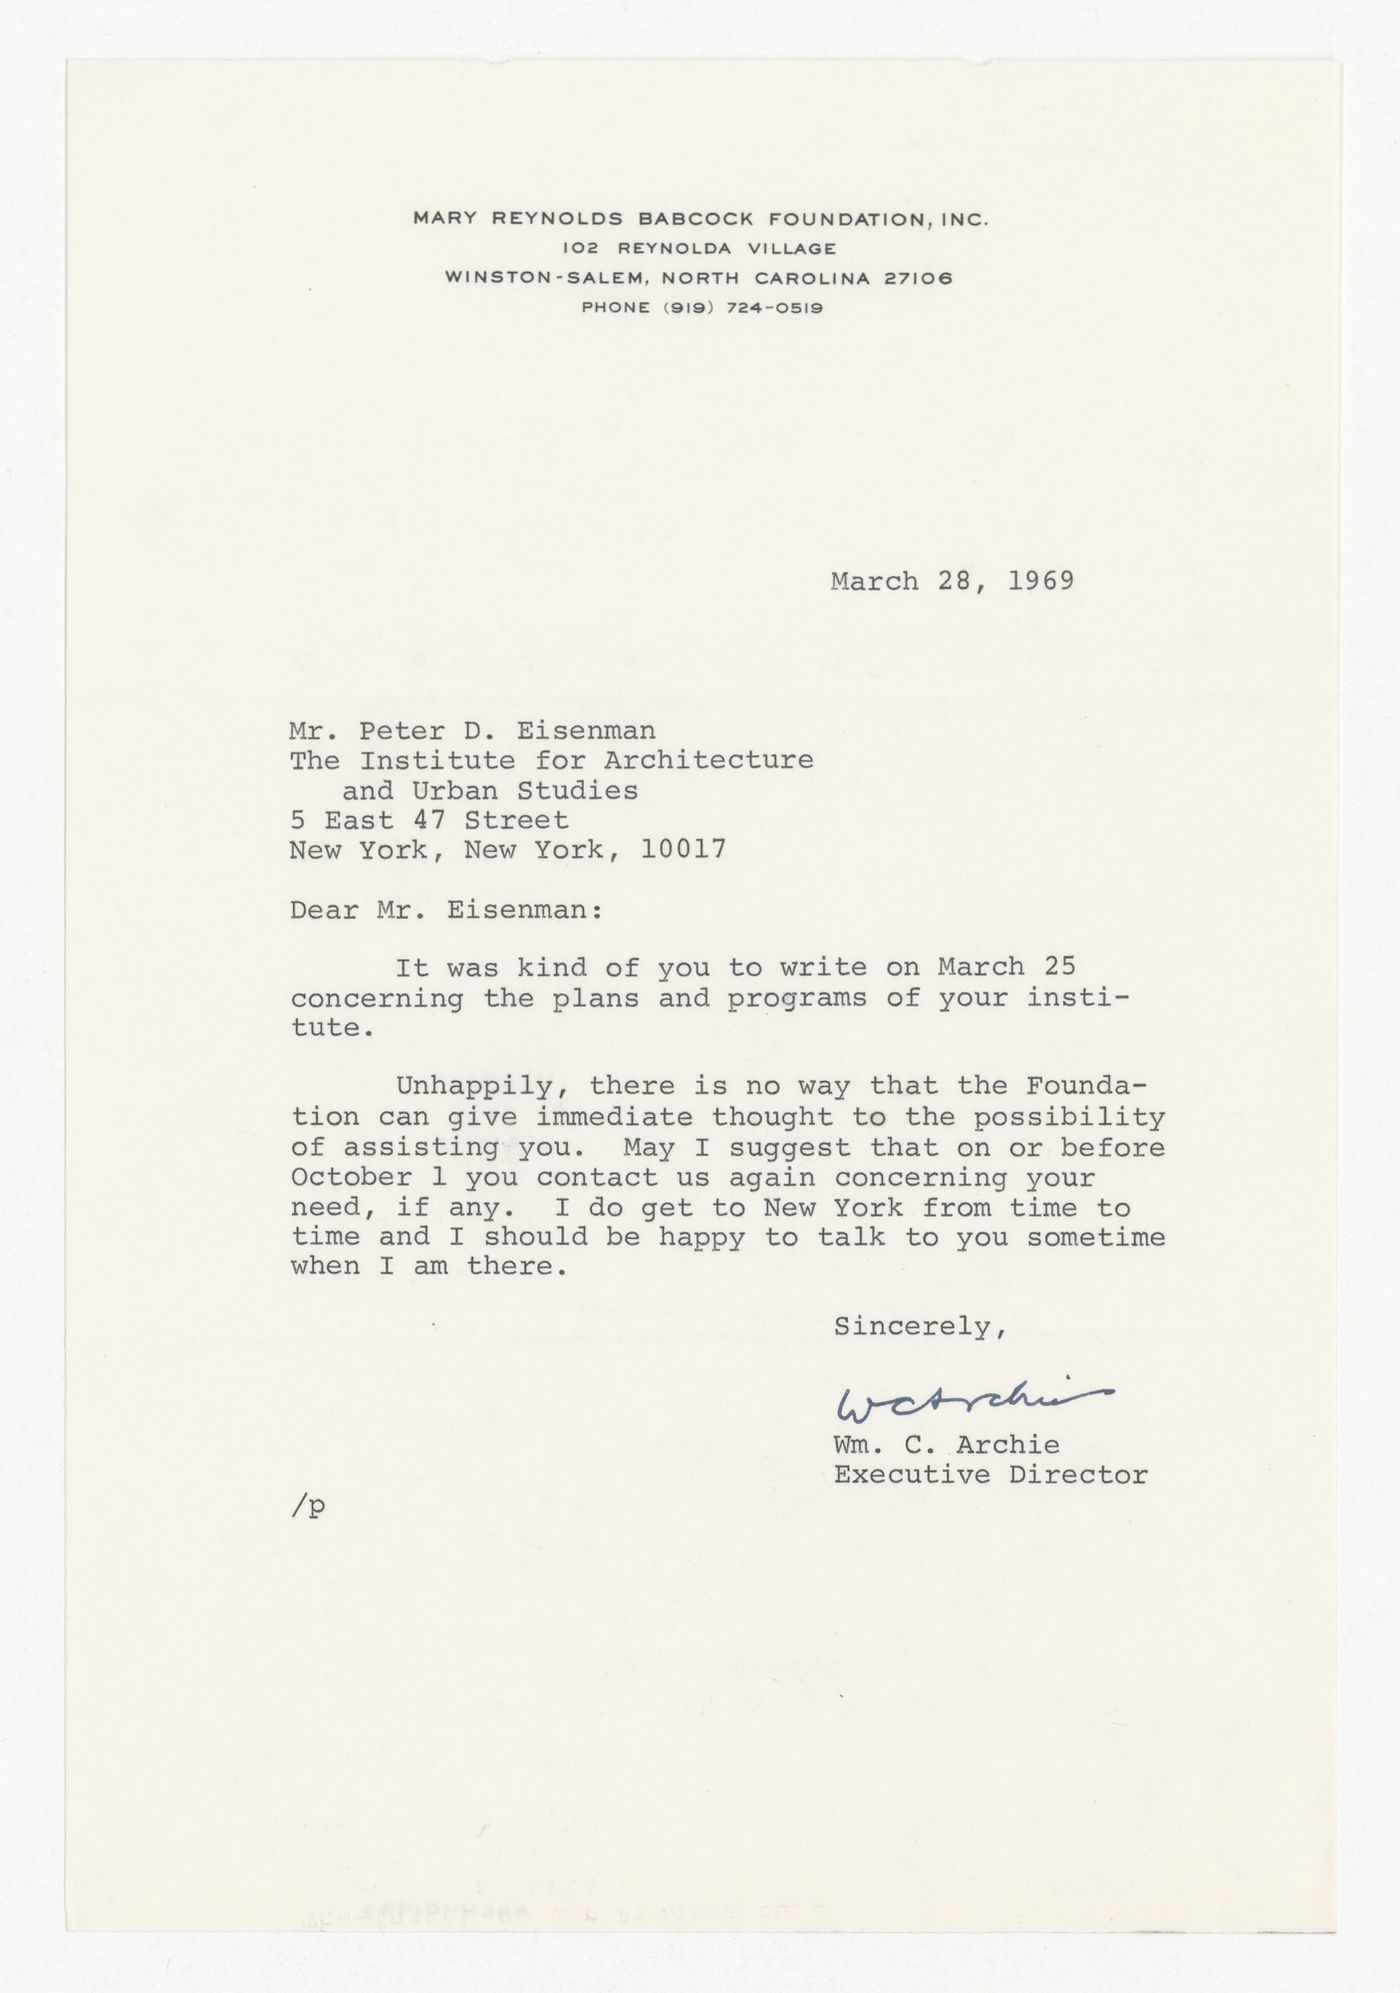 Letter from William C. Archie to Peter D. Eisenman responding to a donation request made by Eisenman with attached copy of original letter